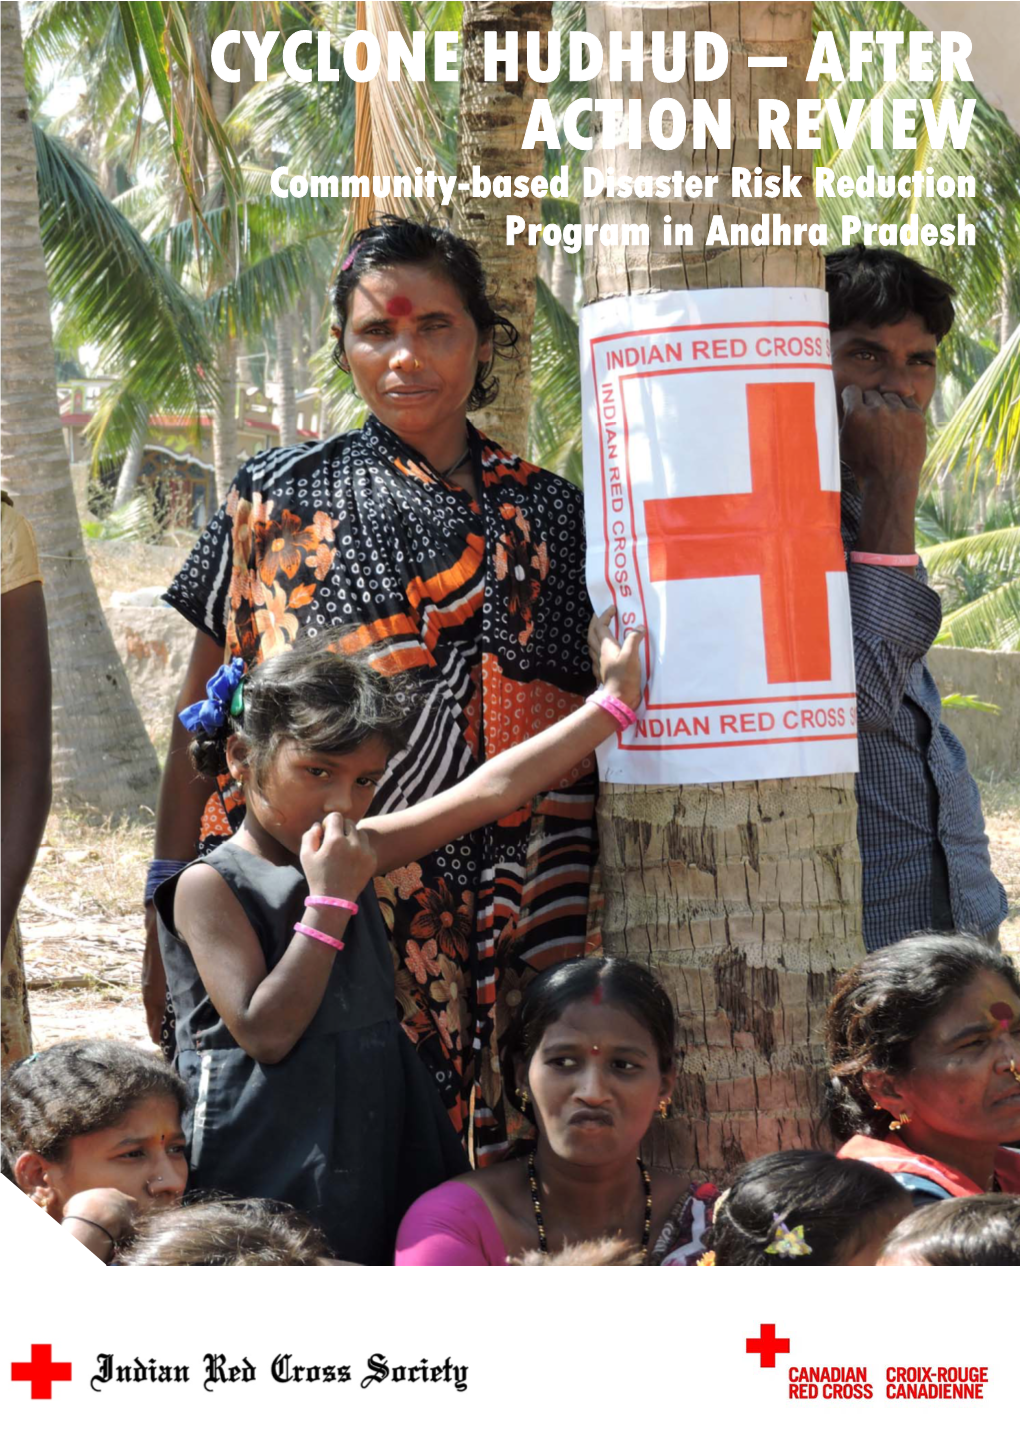 CYCLONE HUDHUD – AFTER ACTION REVIEW Community-Based Disaster Risk Reduction Program in Andhra Pradesh